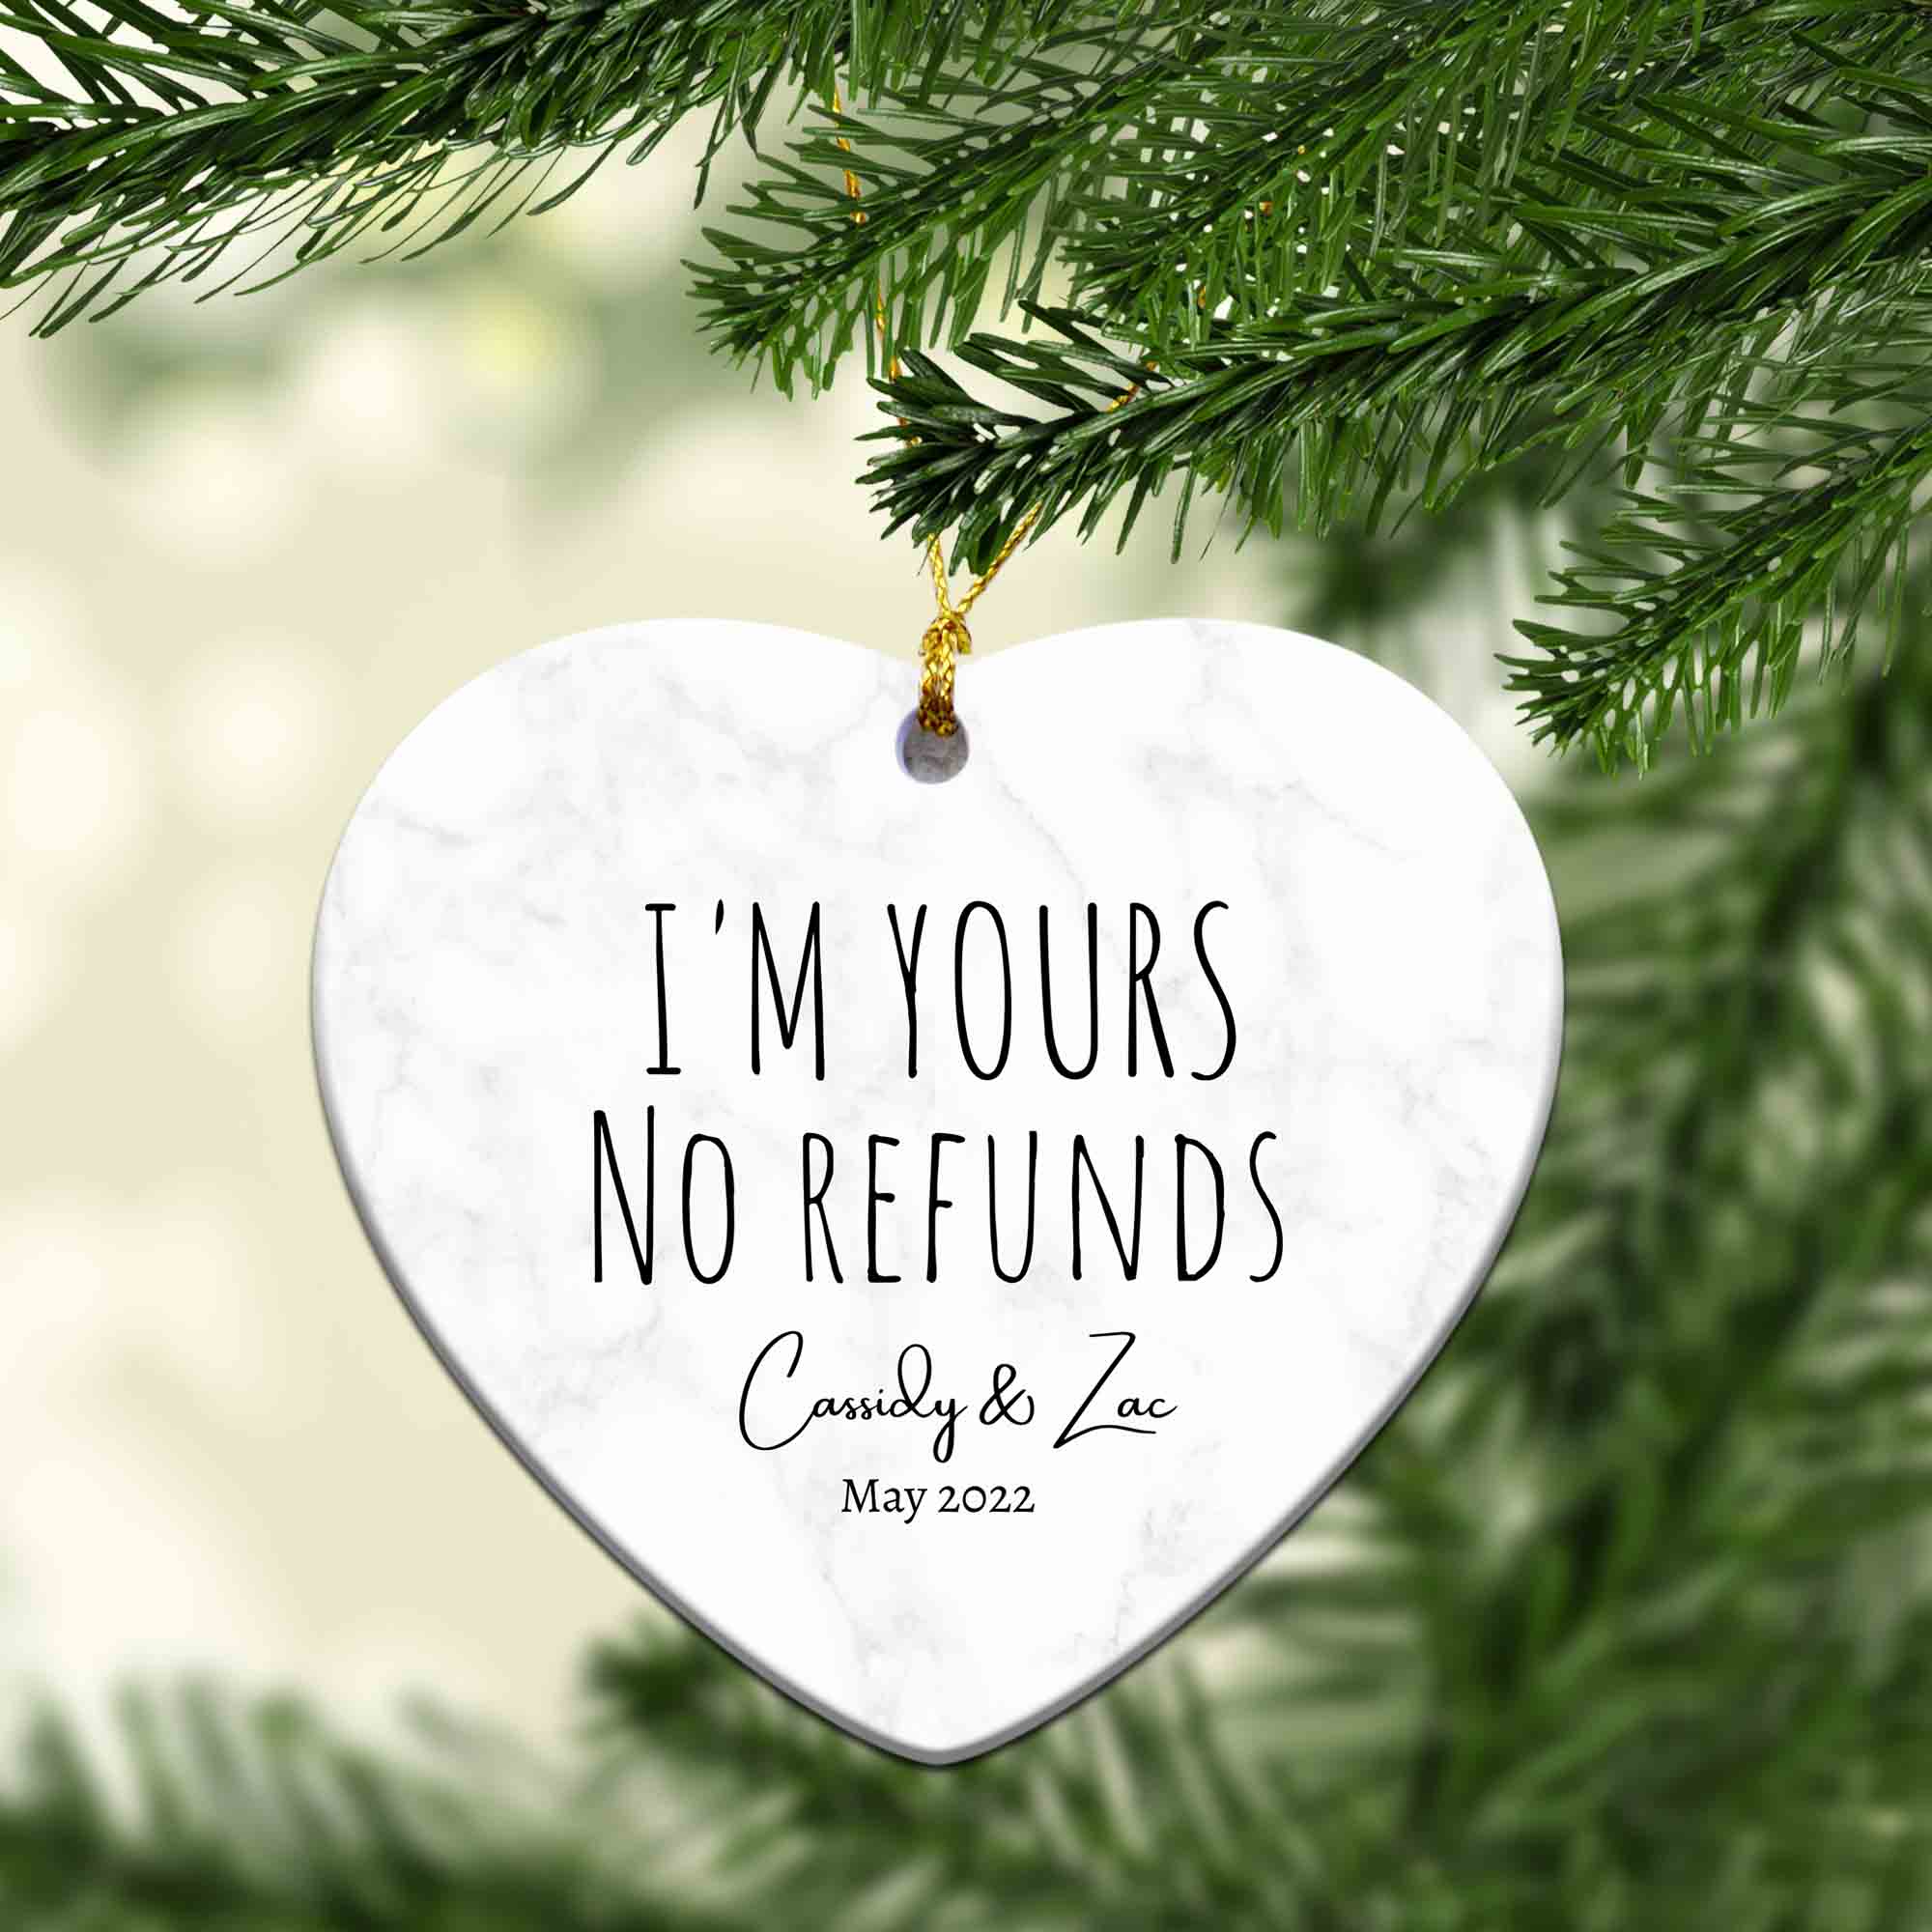 Anniversary Ornament, I'm Yours No Refunds Ornament, Personalized Marriage Anniversary Ornaments, Christmas Ornaments, Christmas Gift For Couples Ornament